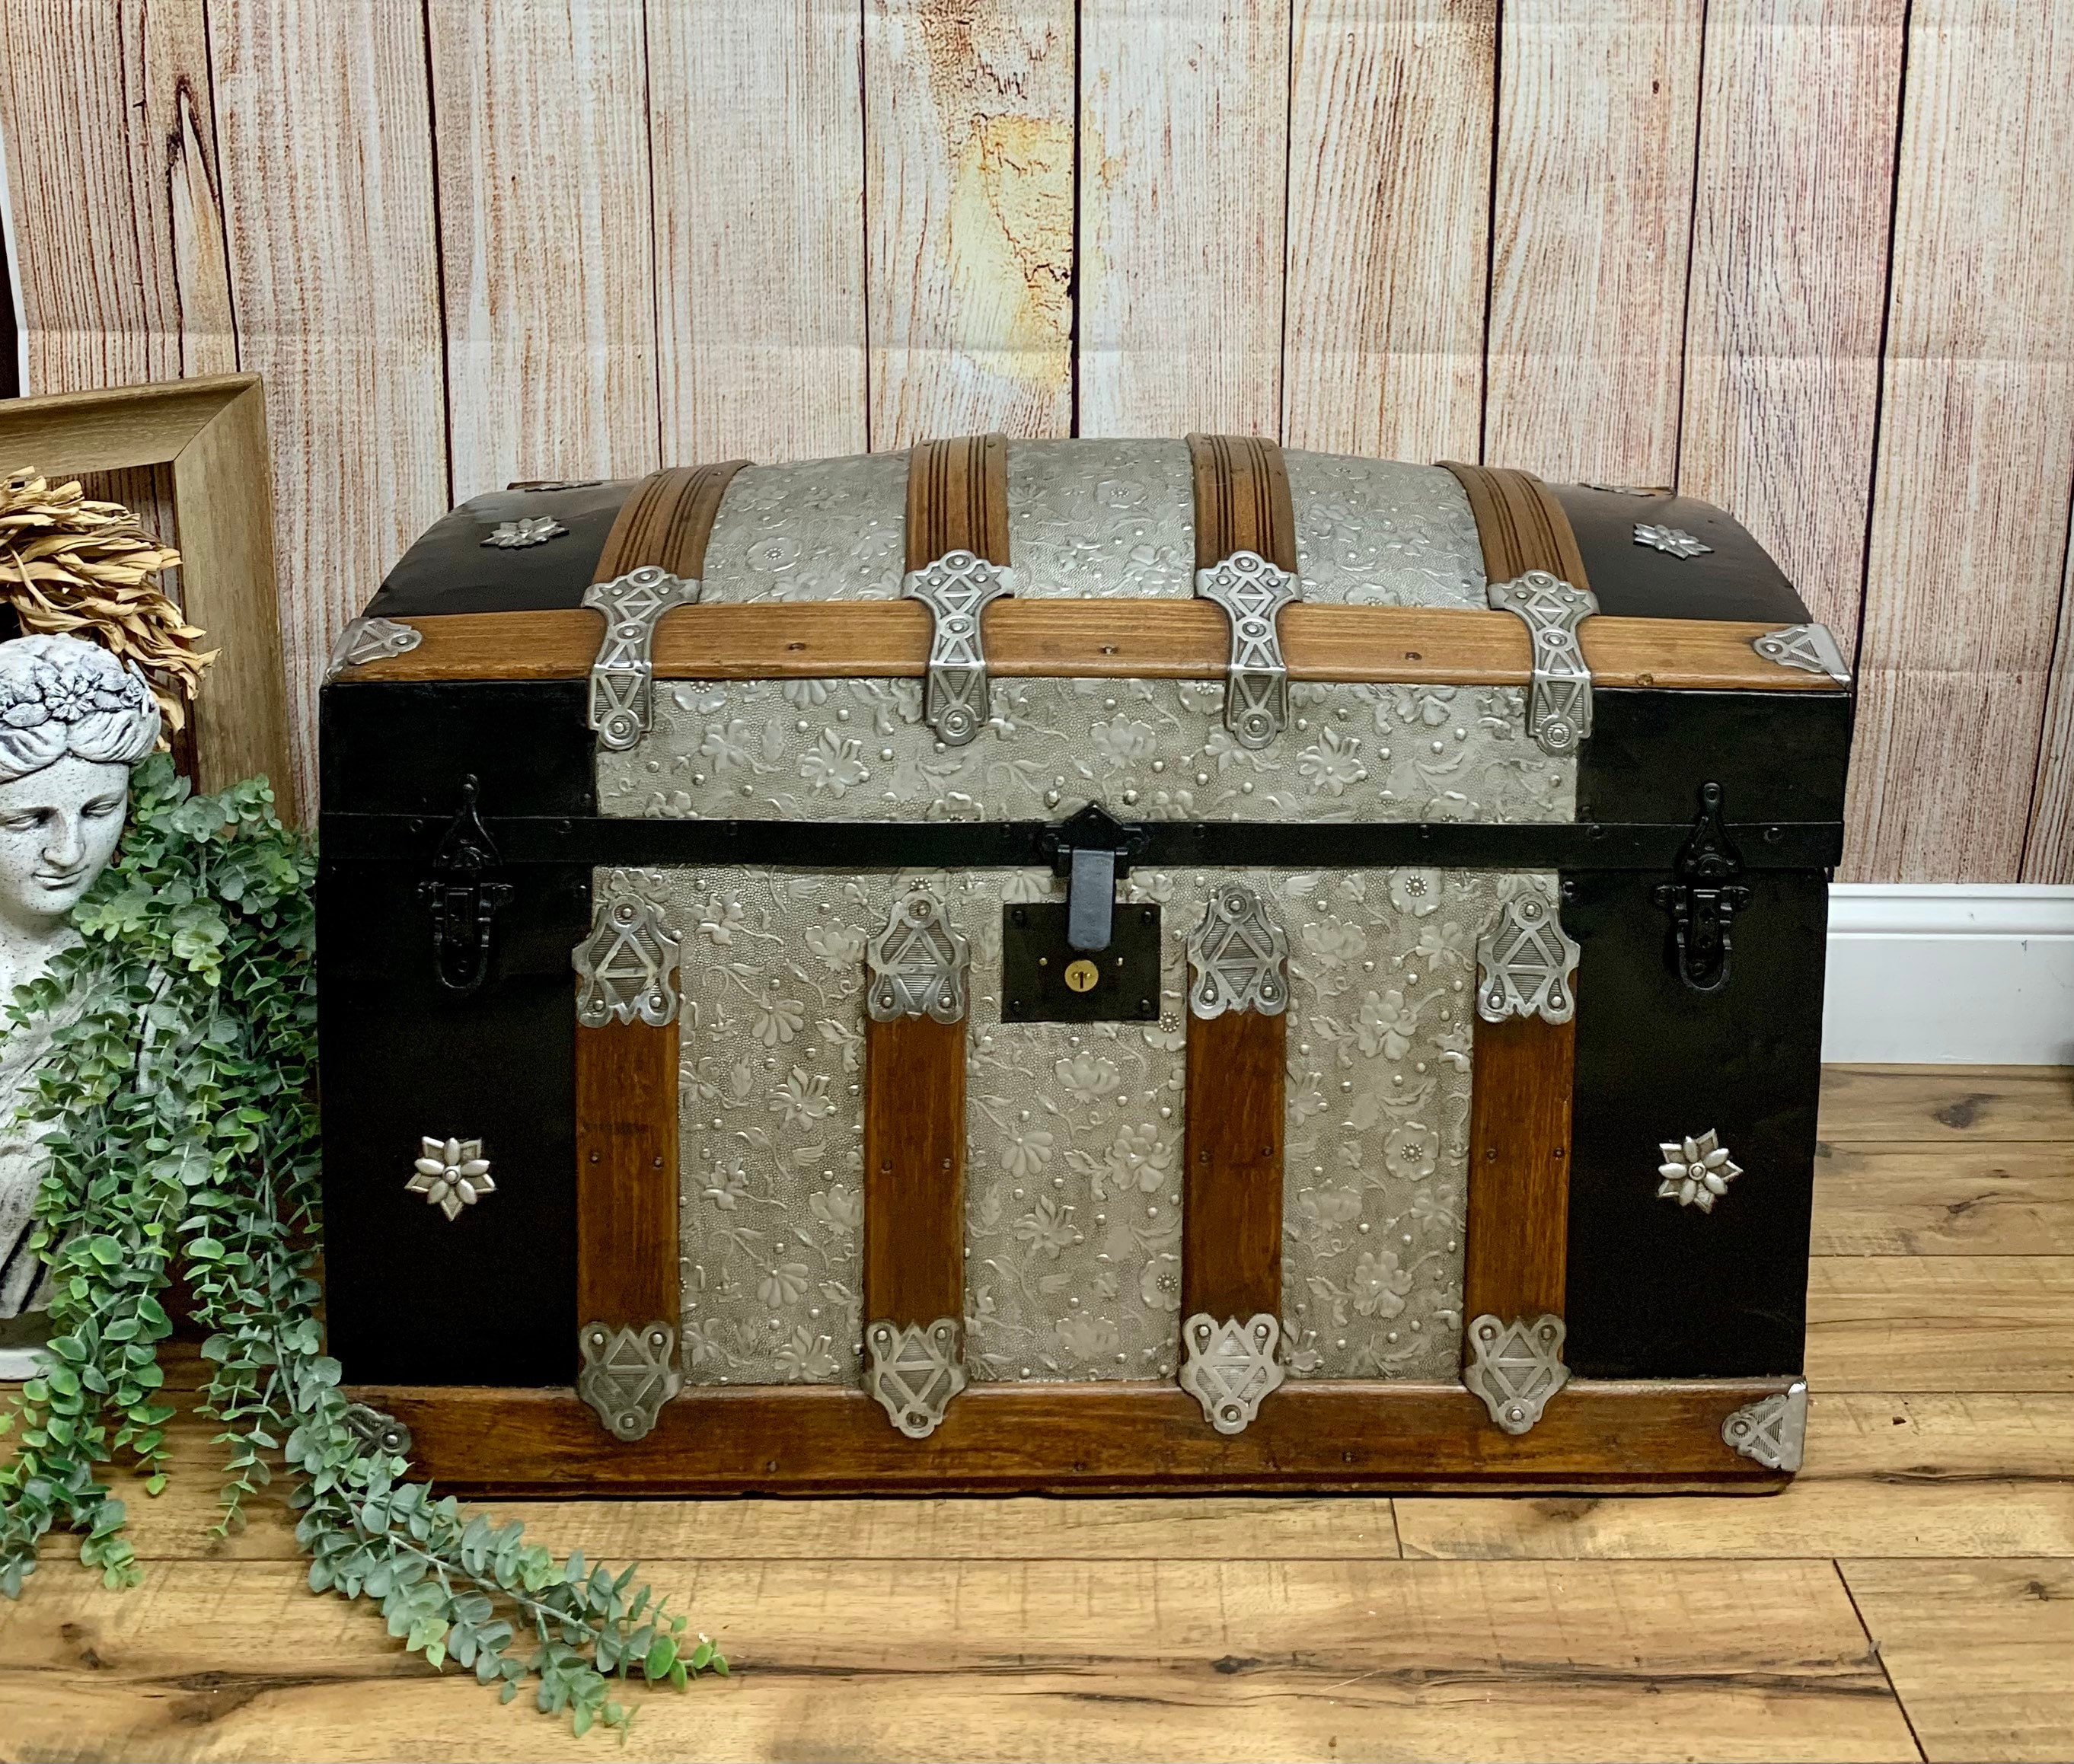 342 Restored antique steamer trunks for sale Victorian era - All Wood,  Leather and Pressed Tin - Dome Top, Flat Top, Roll Top